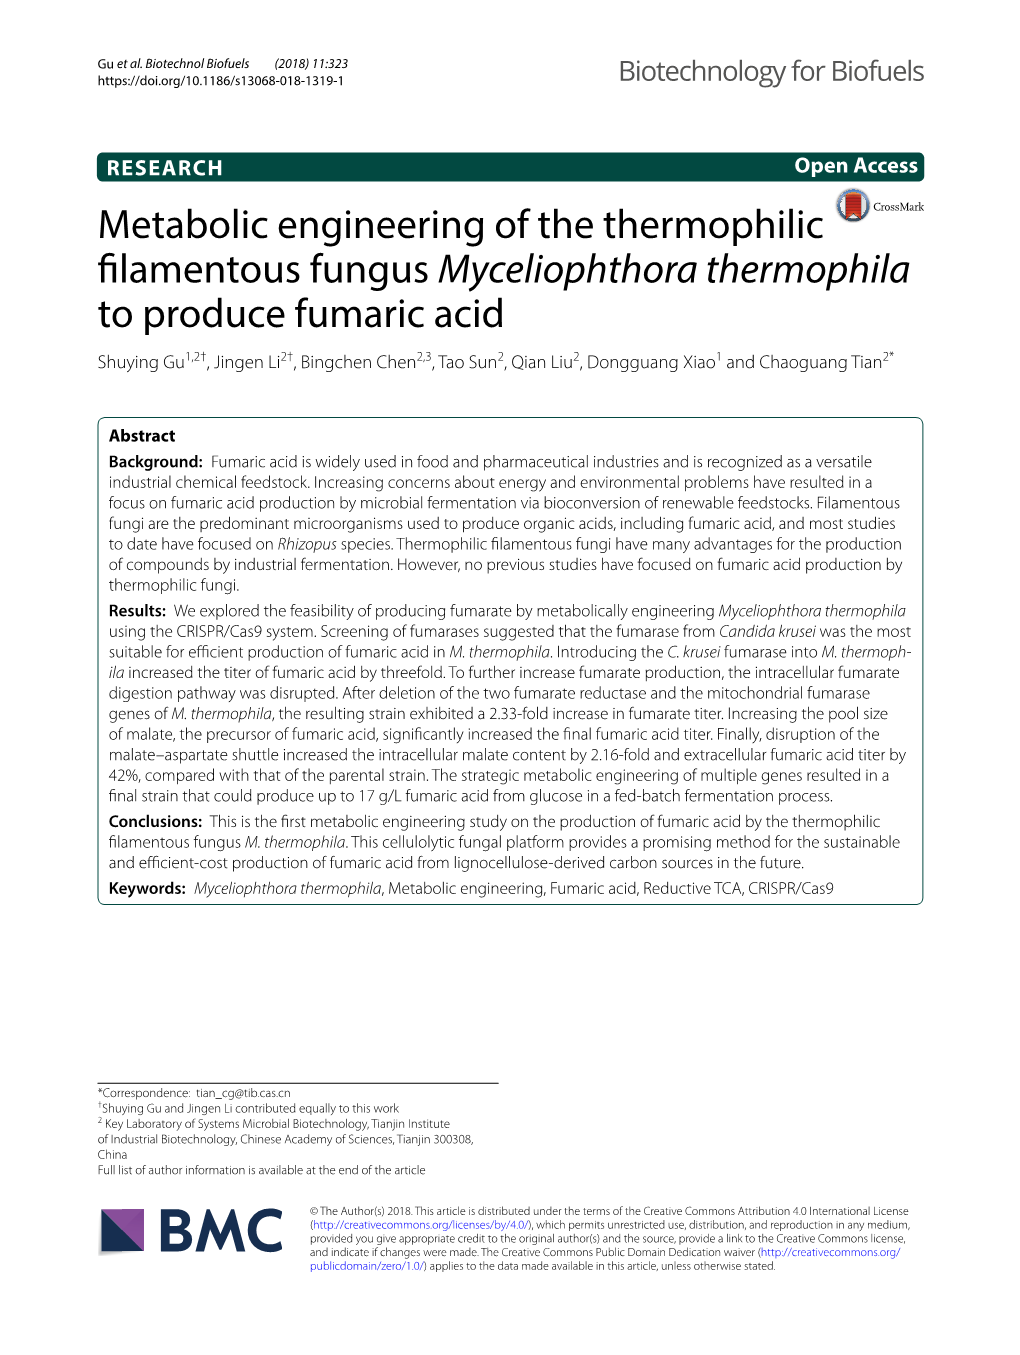 Metabolic Engineering of the Thermophilic Filamentous Fungus